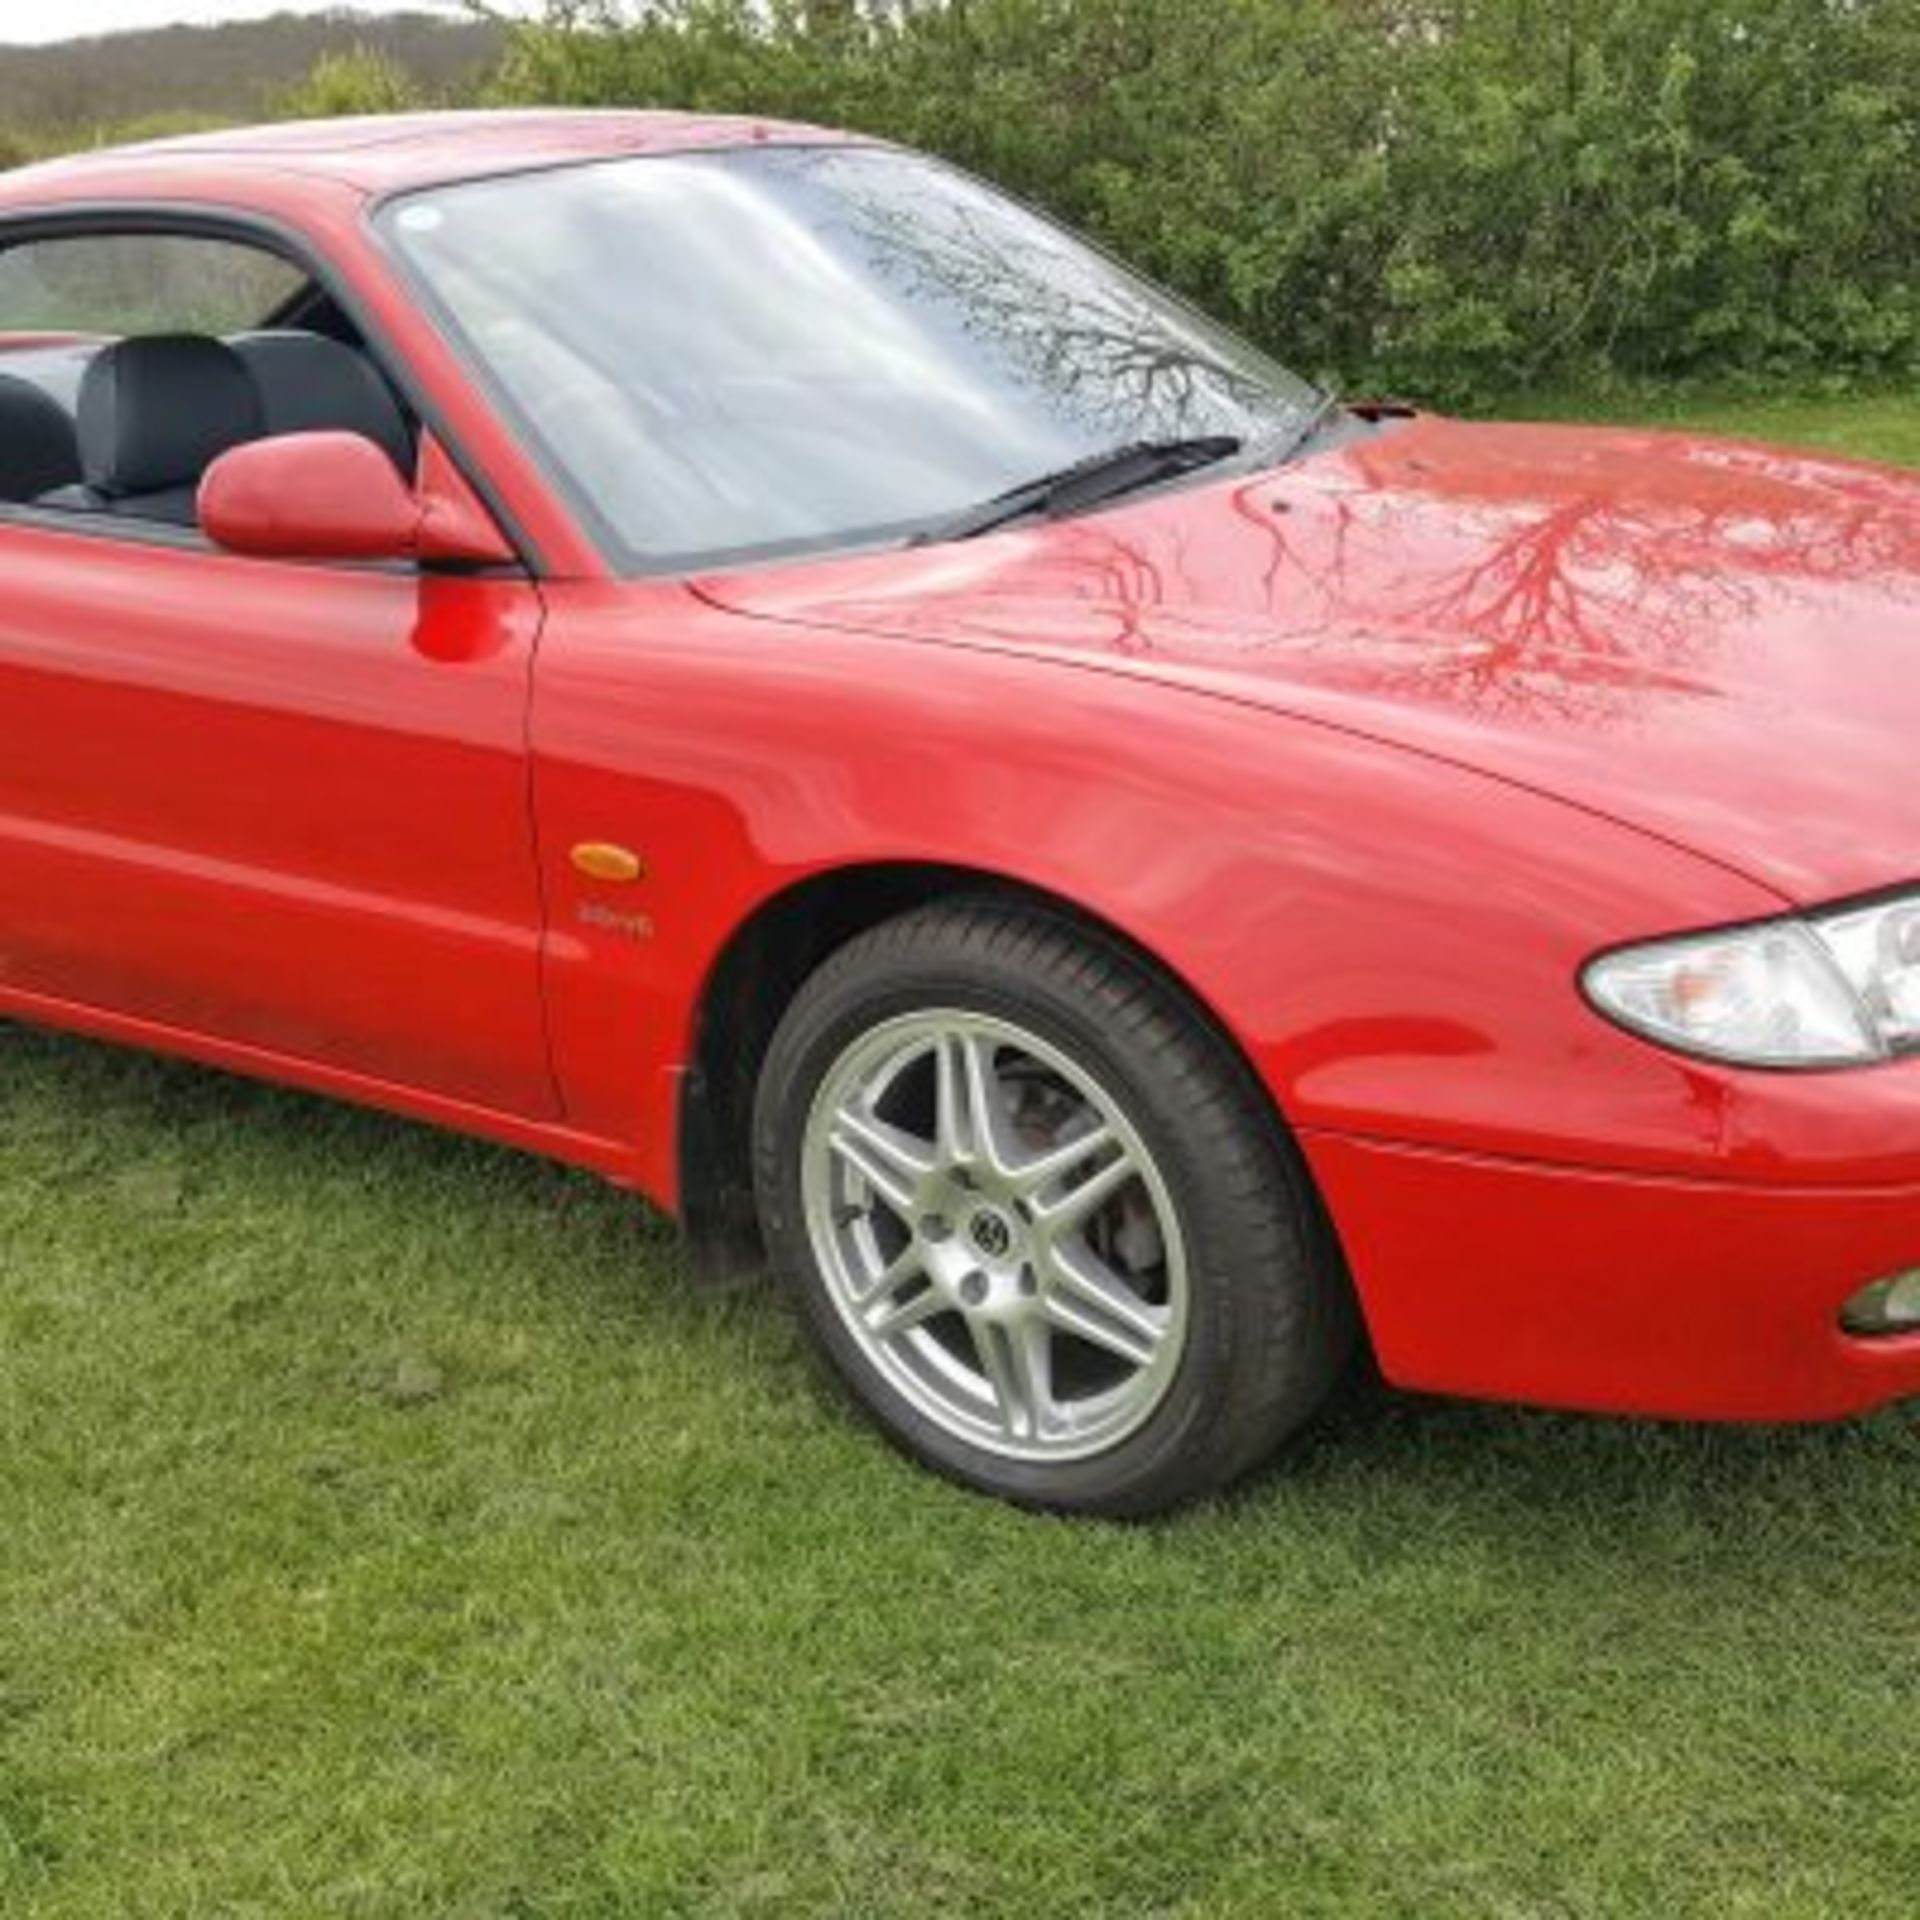 Mazda MX6 Manual Very Low Mileage FSH 1997 - Well - Image 5 of 12